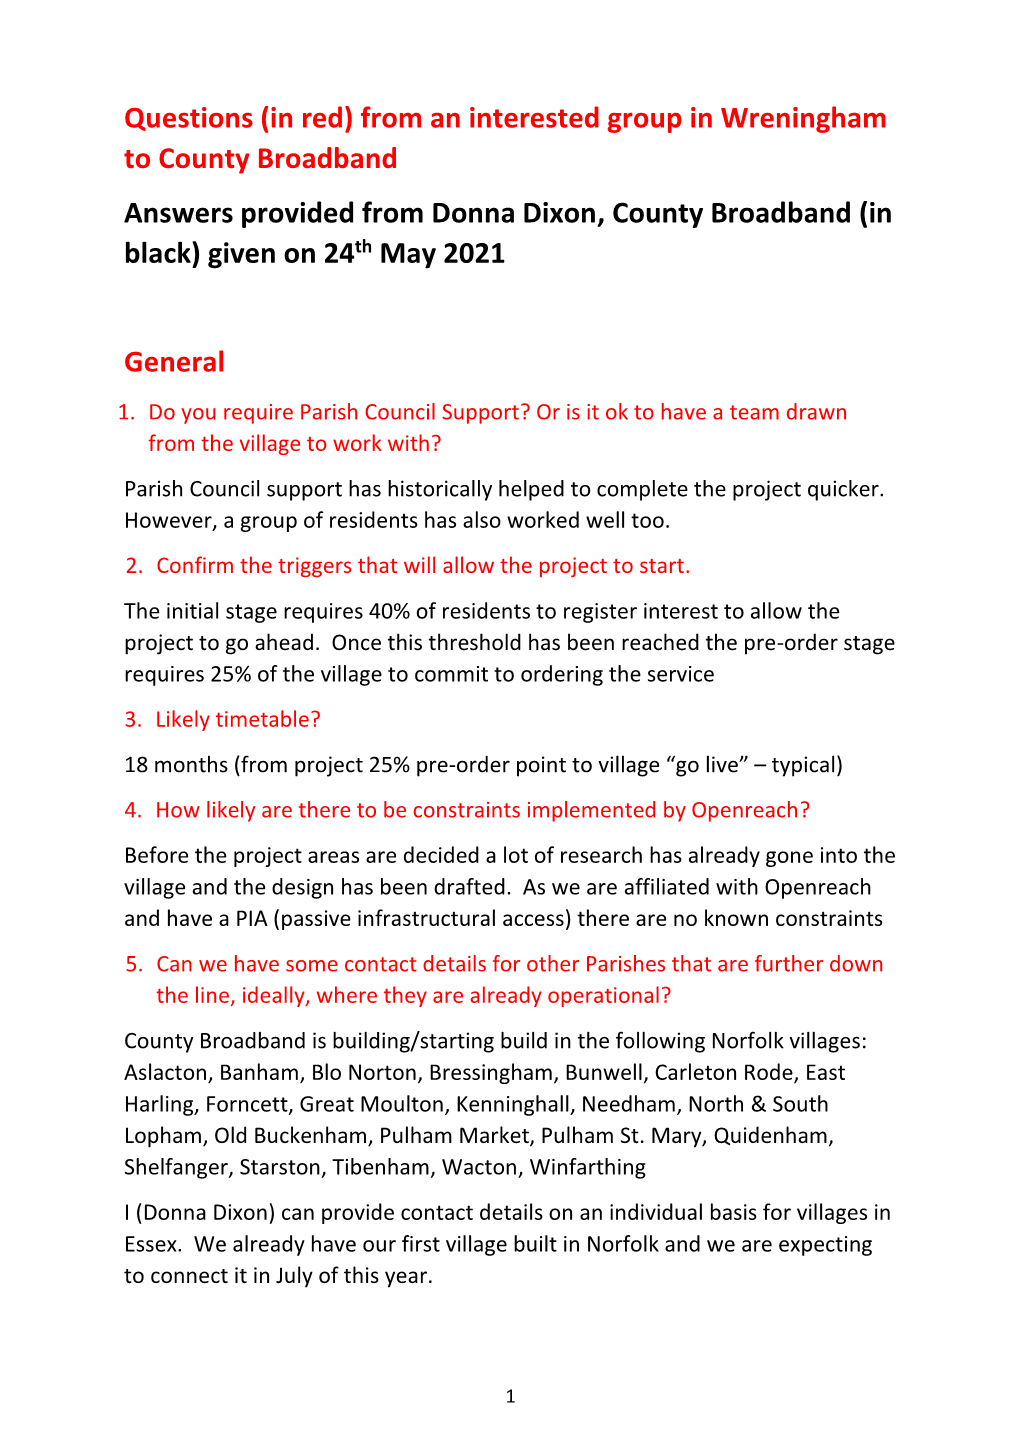 Questions (In Red) from an Interested Group in Wreningham to County Broadband Answers Provided from Donna Dixon, County Broadband (In Black) Given on 24Th May 2021